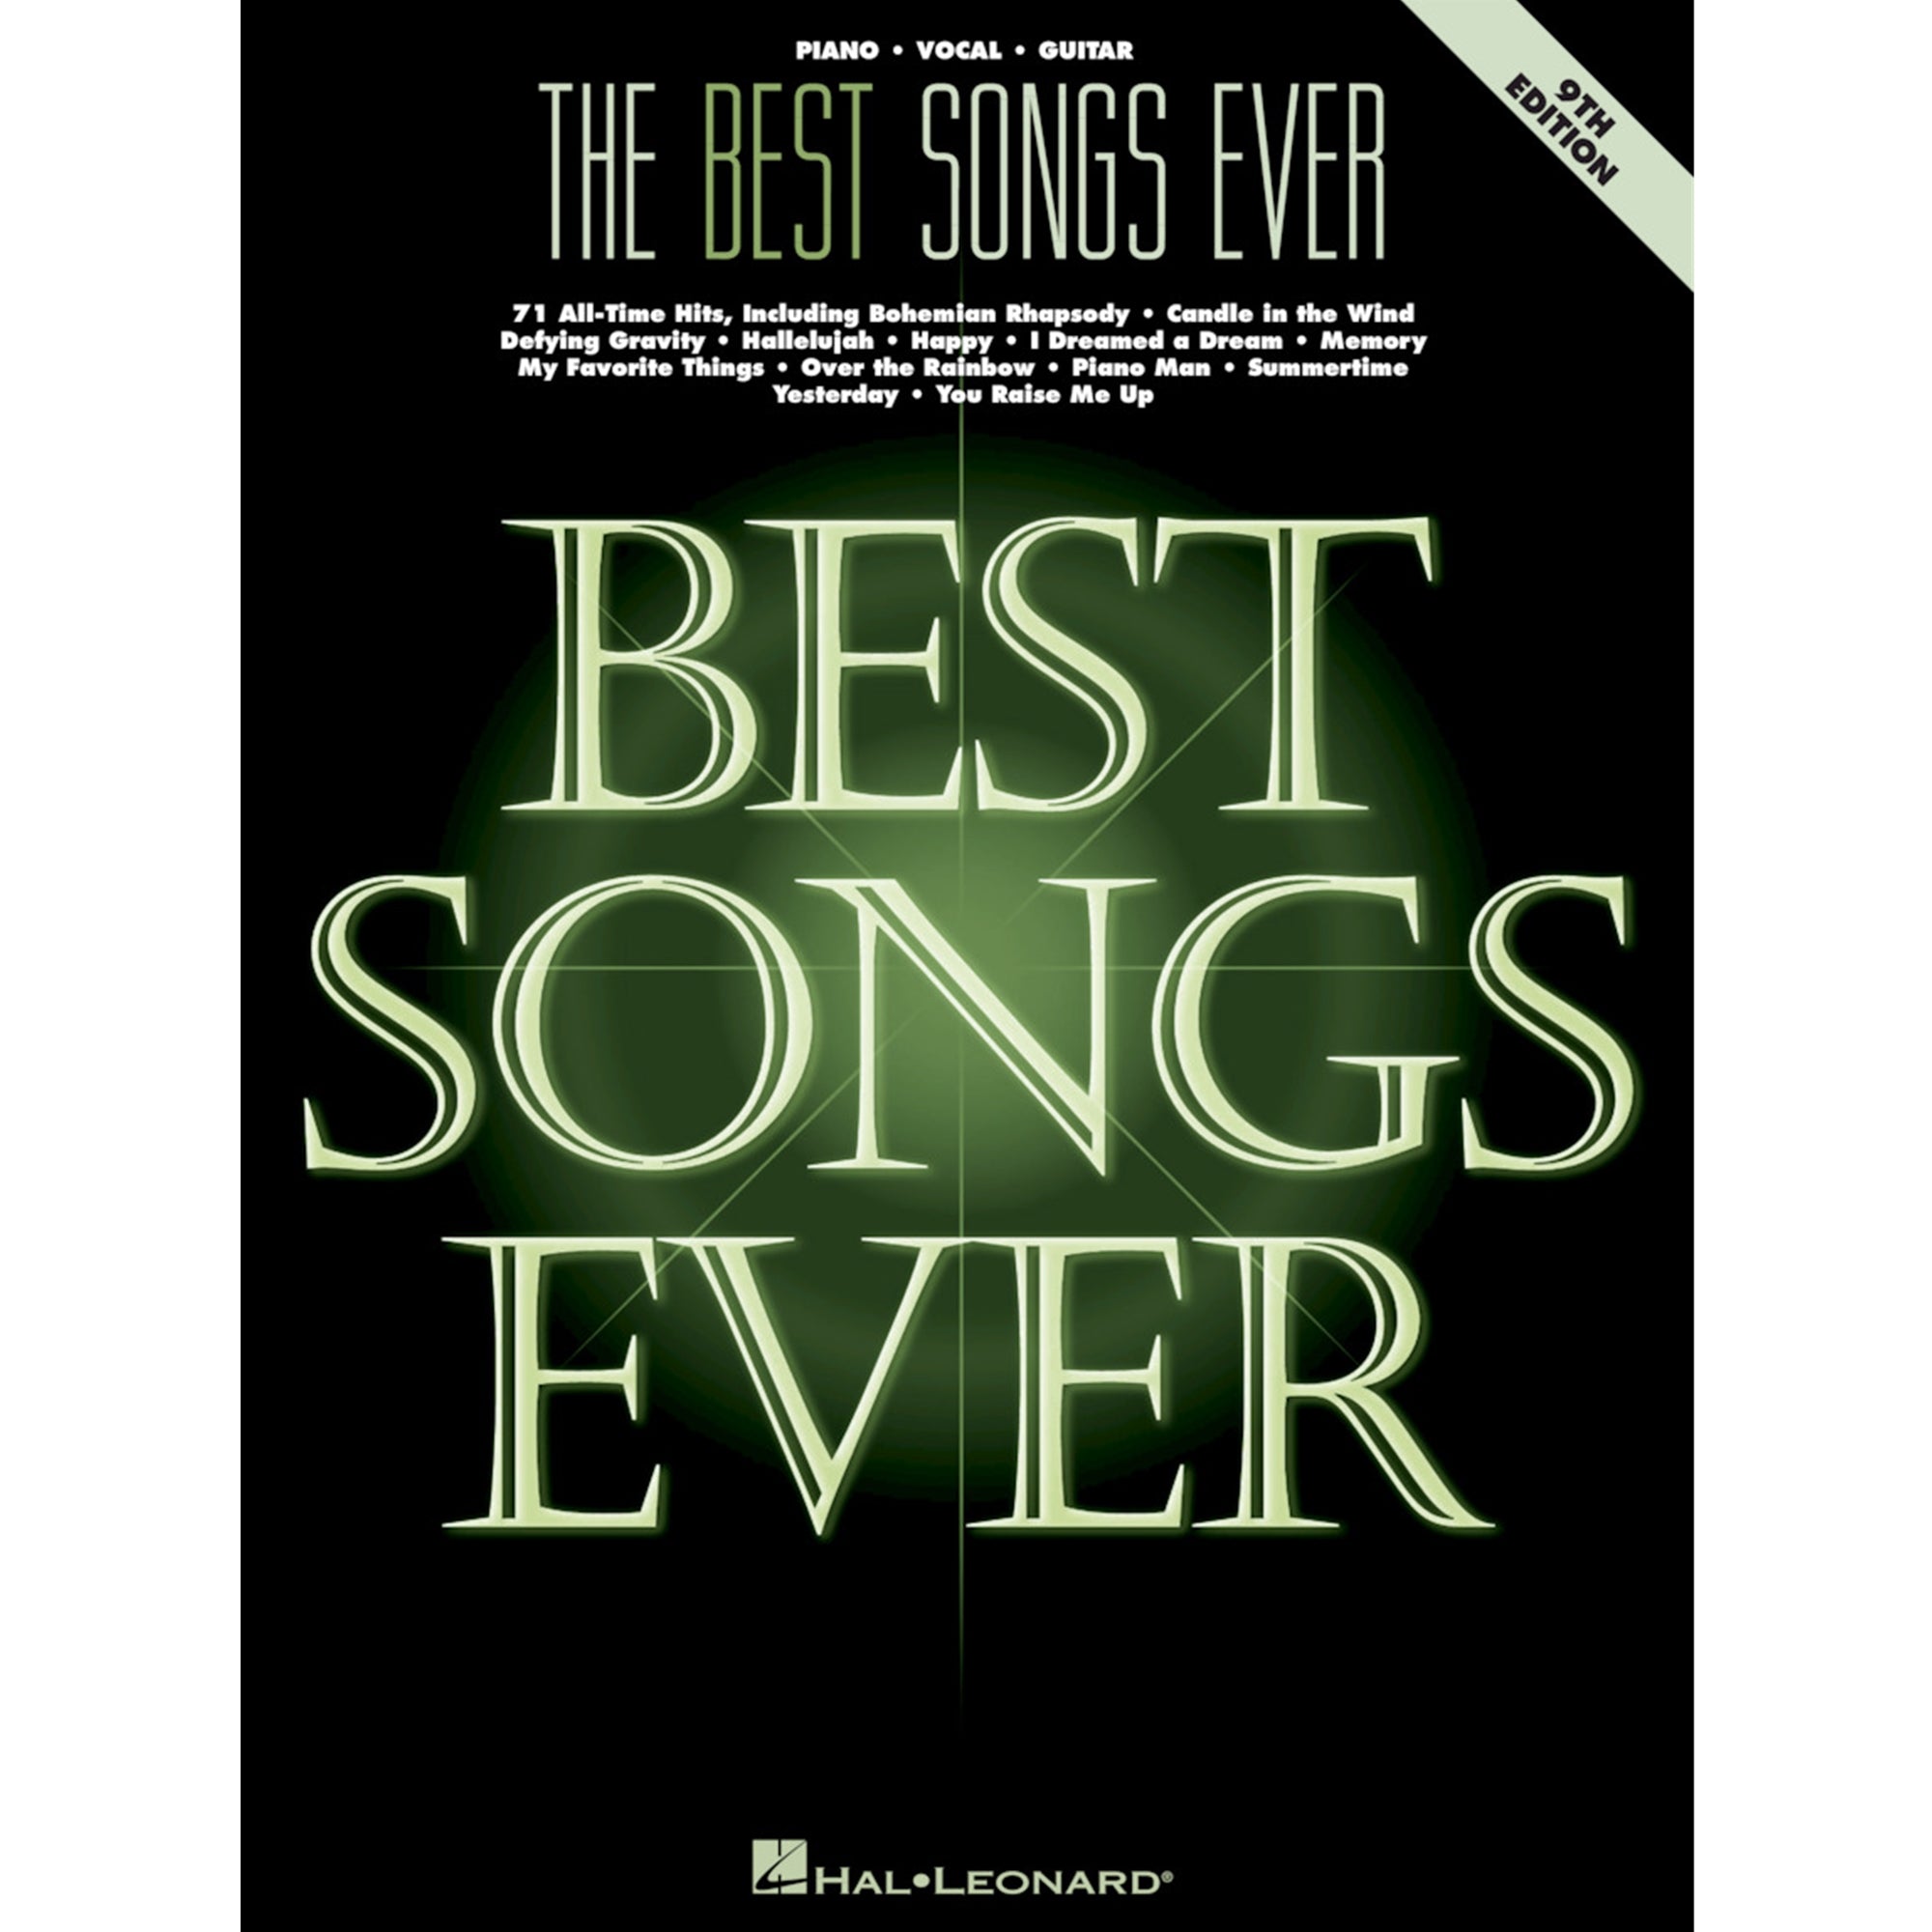 HAL LEONARD 265721 The Best Songs Ever - 9th Edition